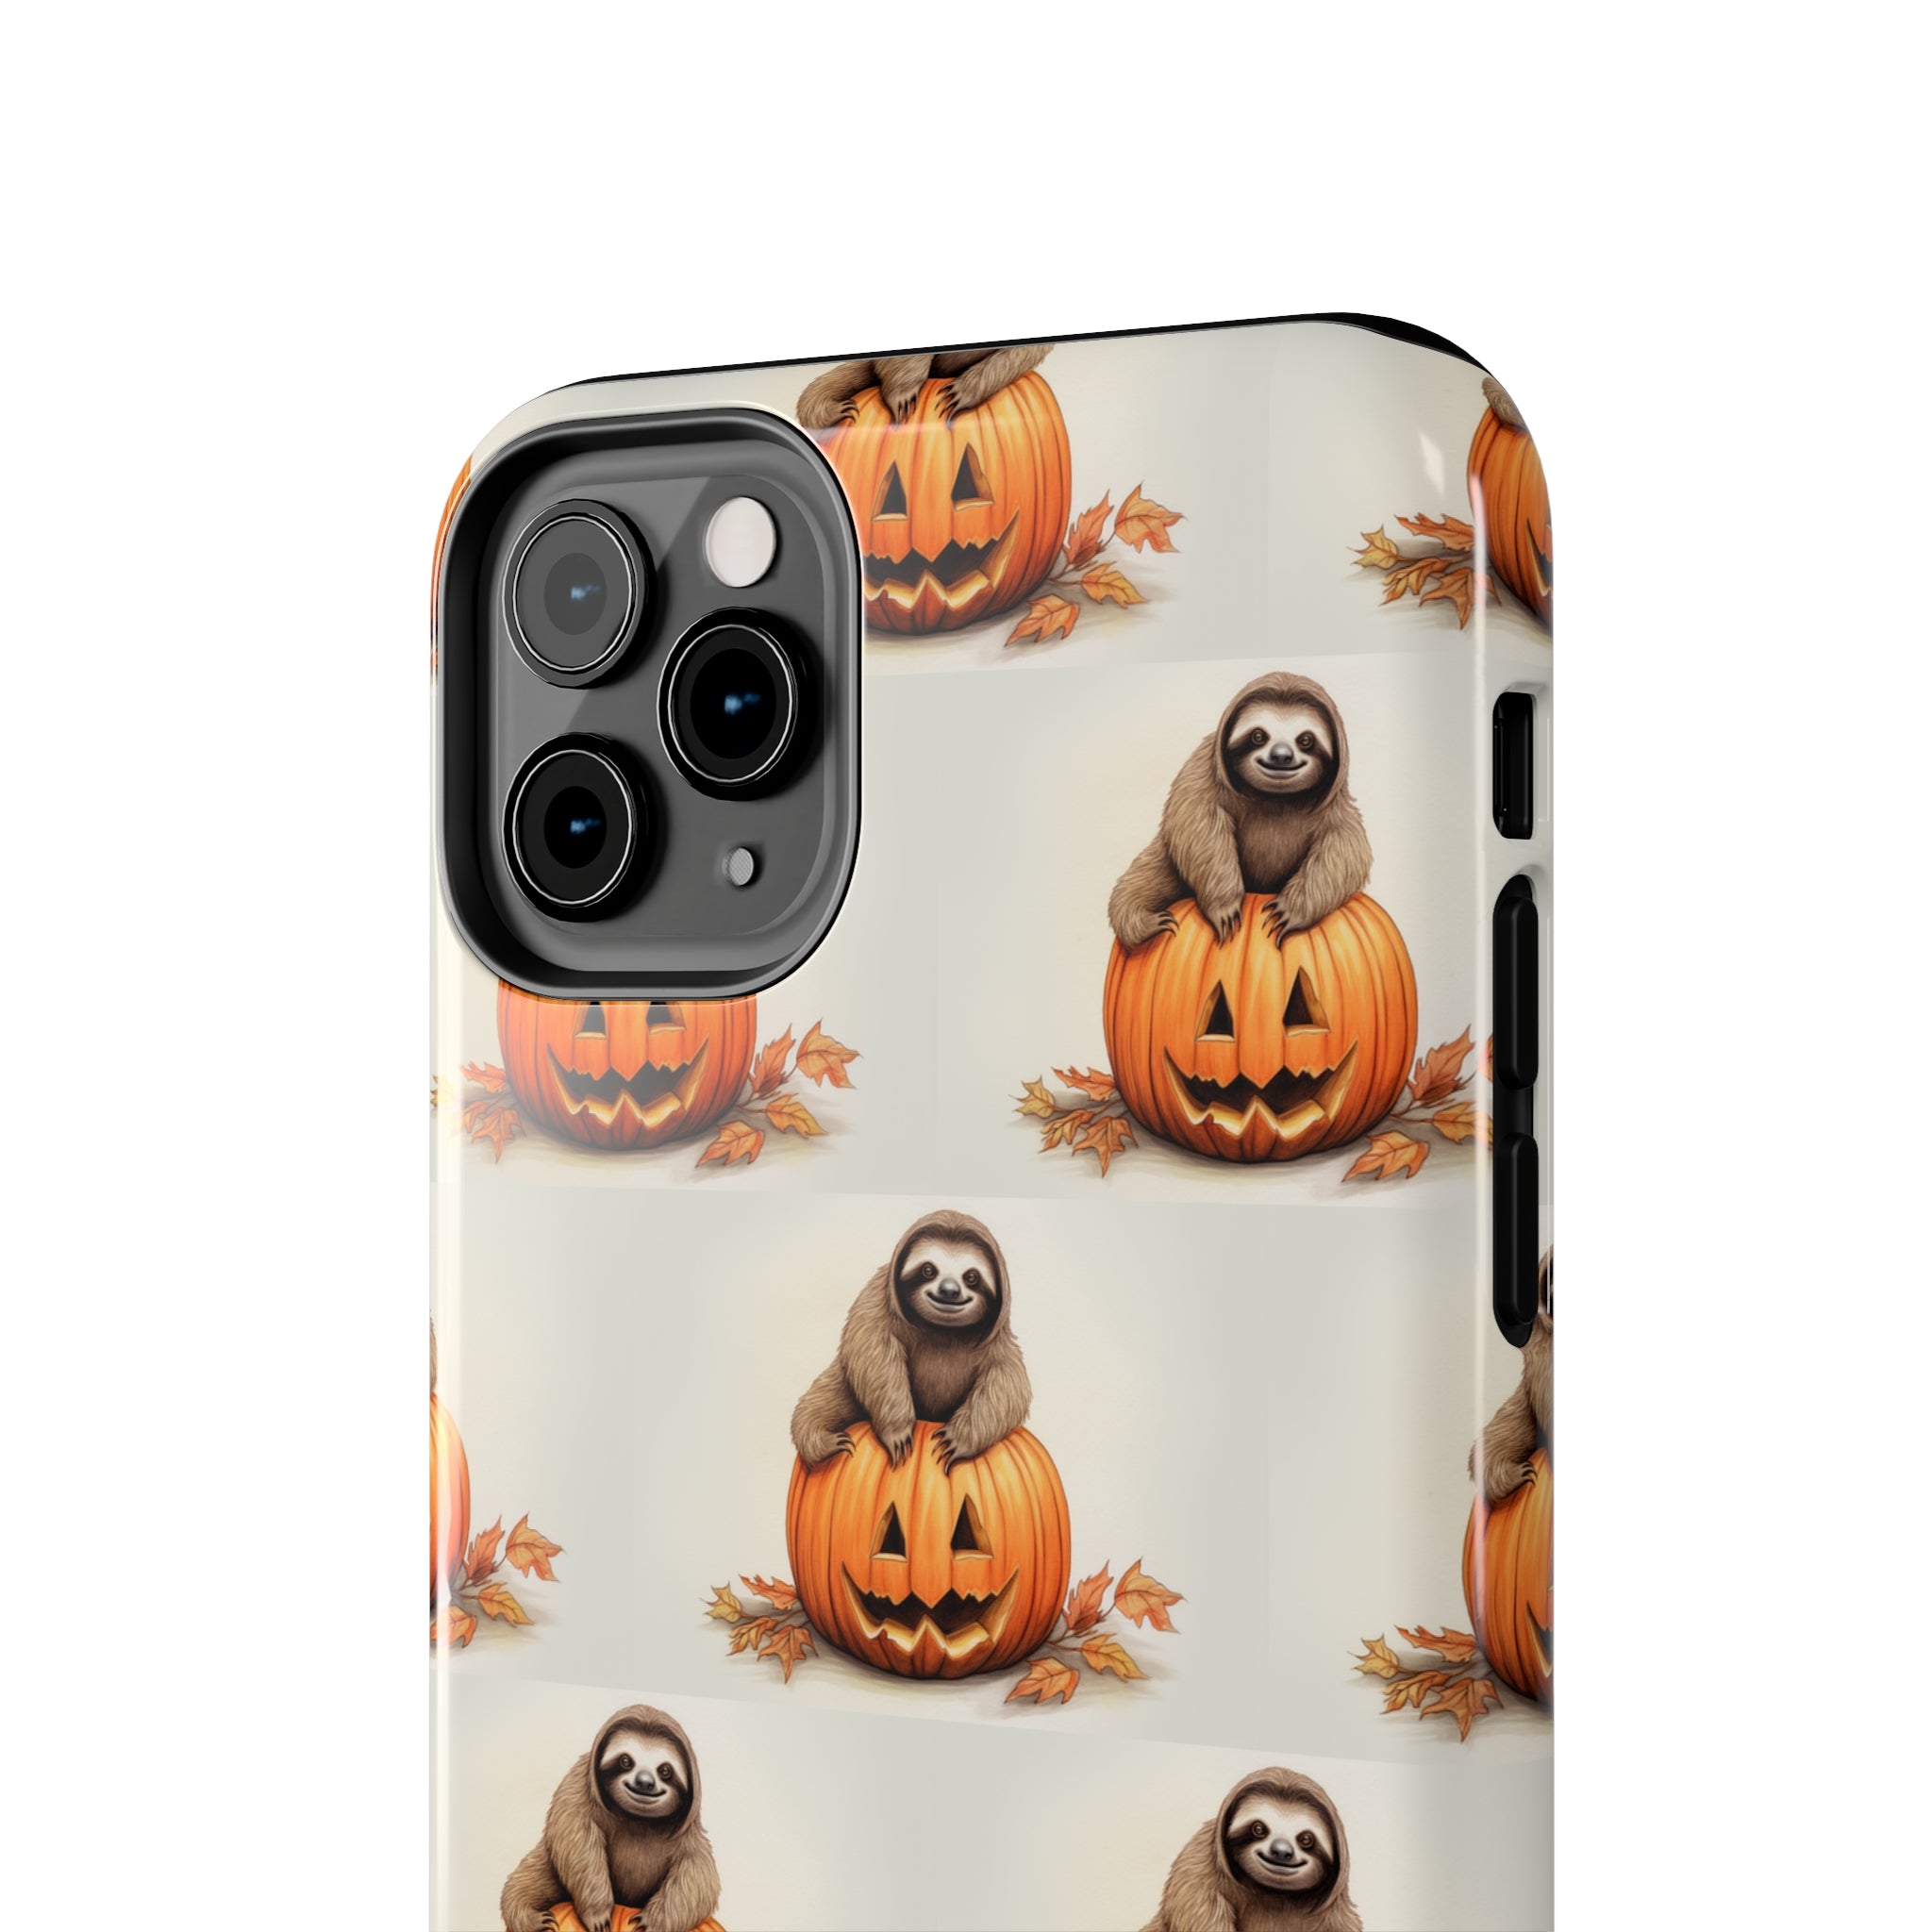 Happy Halloween Sloth on Pumpkin - Tough iPhone Cases -21 Sizes